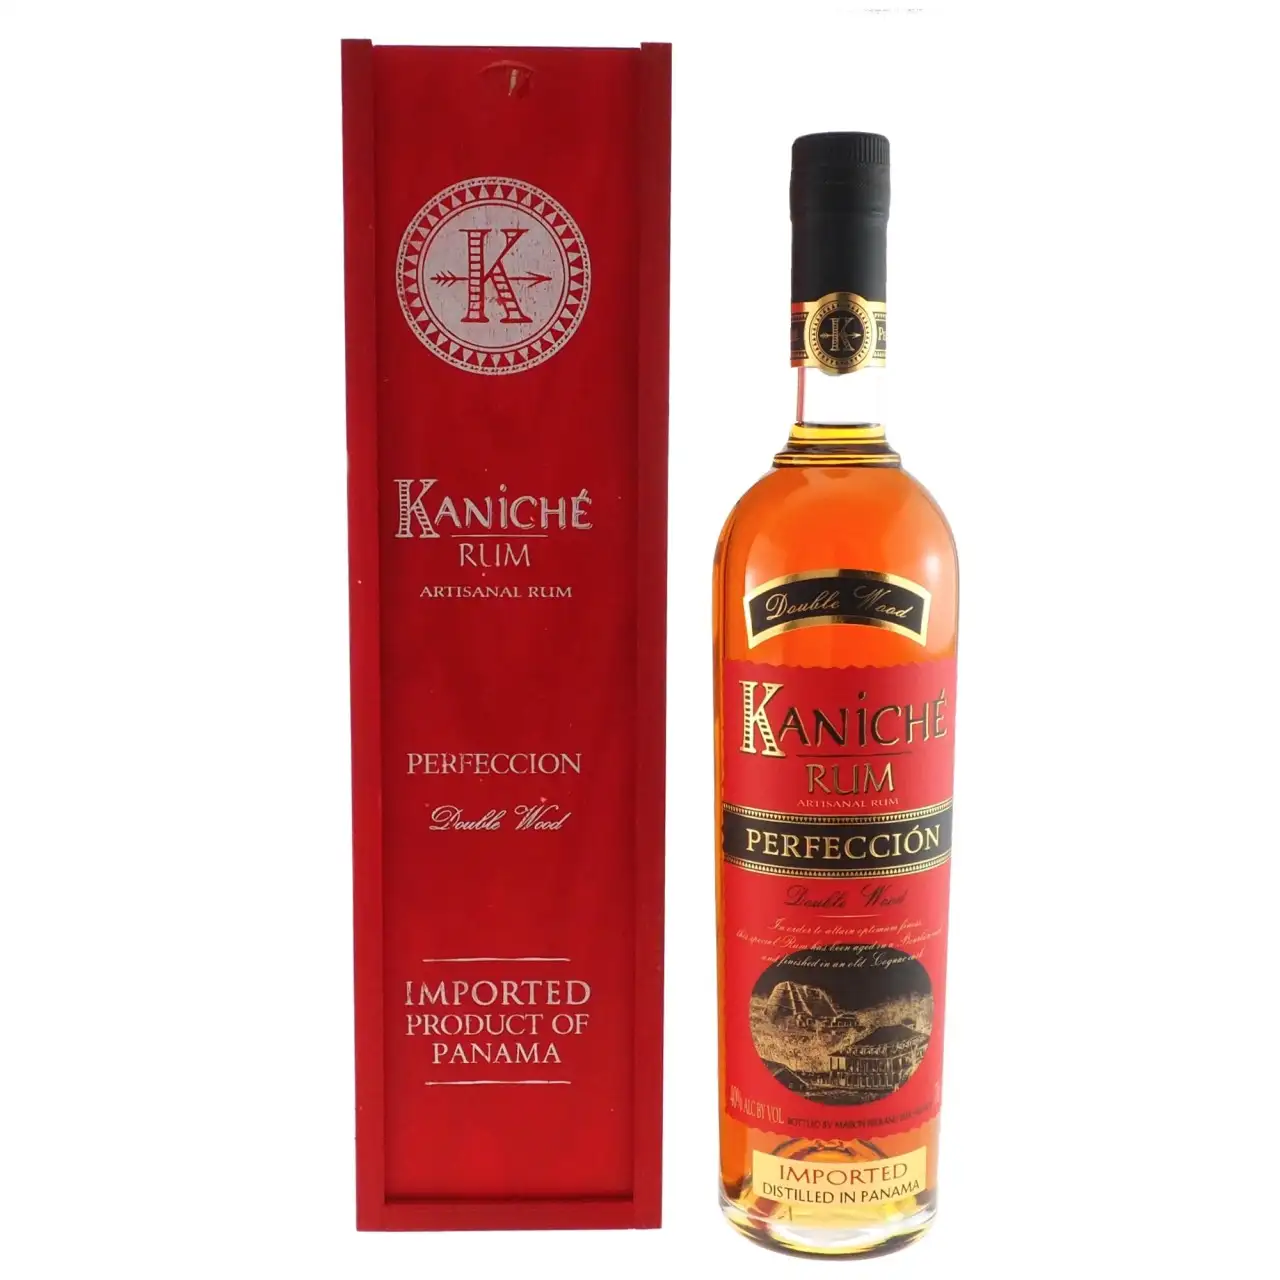 Image of the front of the bottle of the rum Kaniché Double Wood Perfección